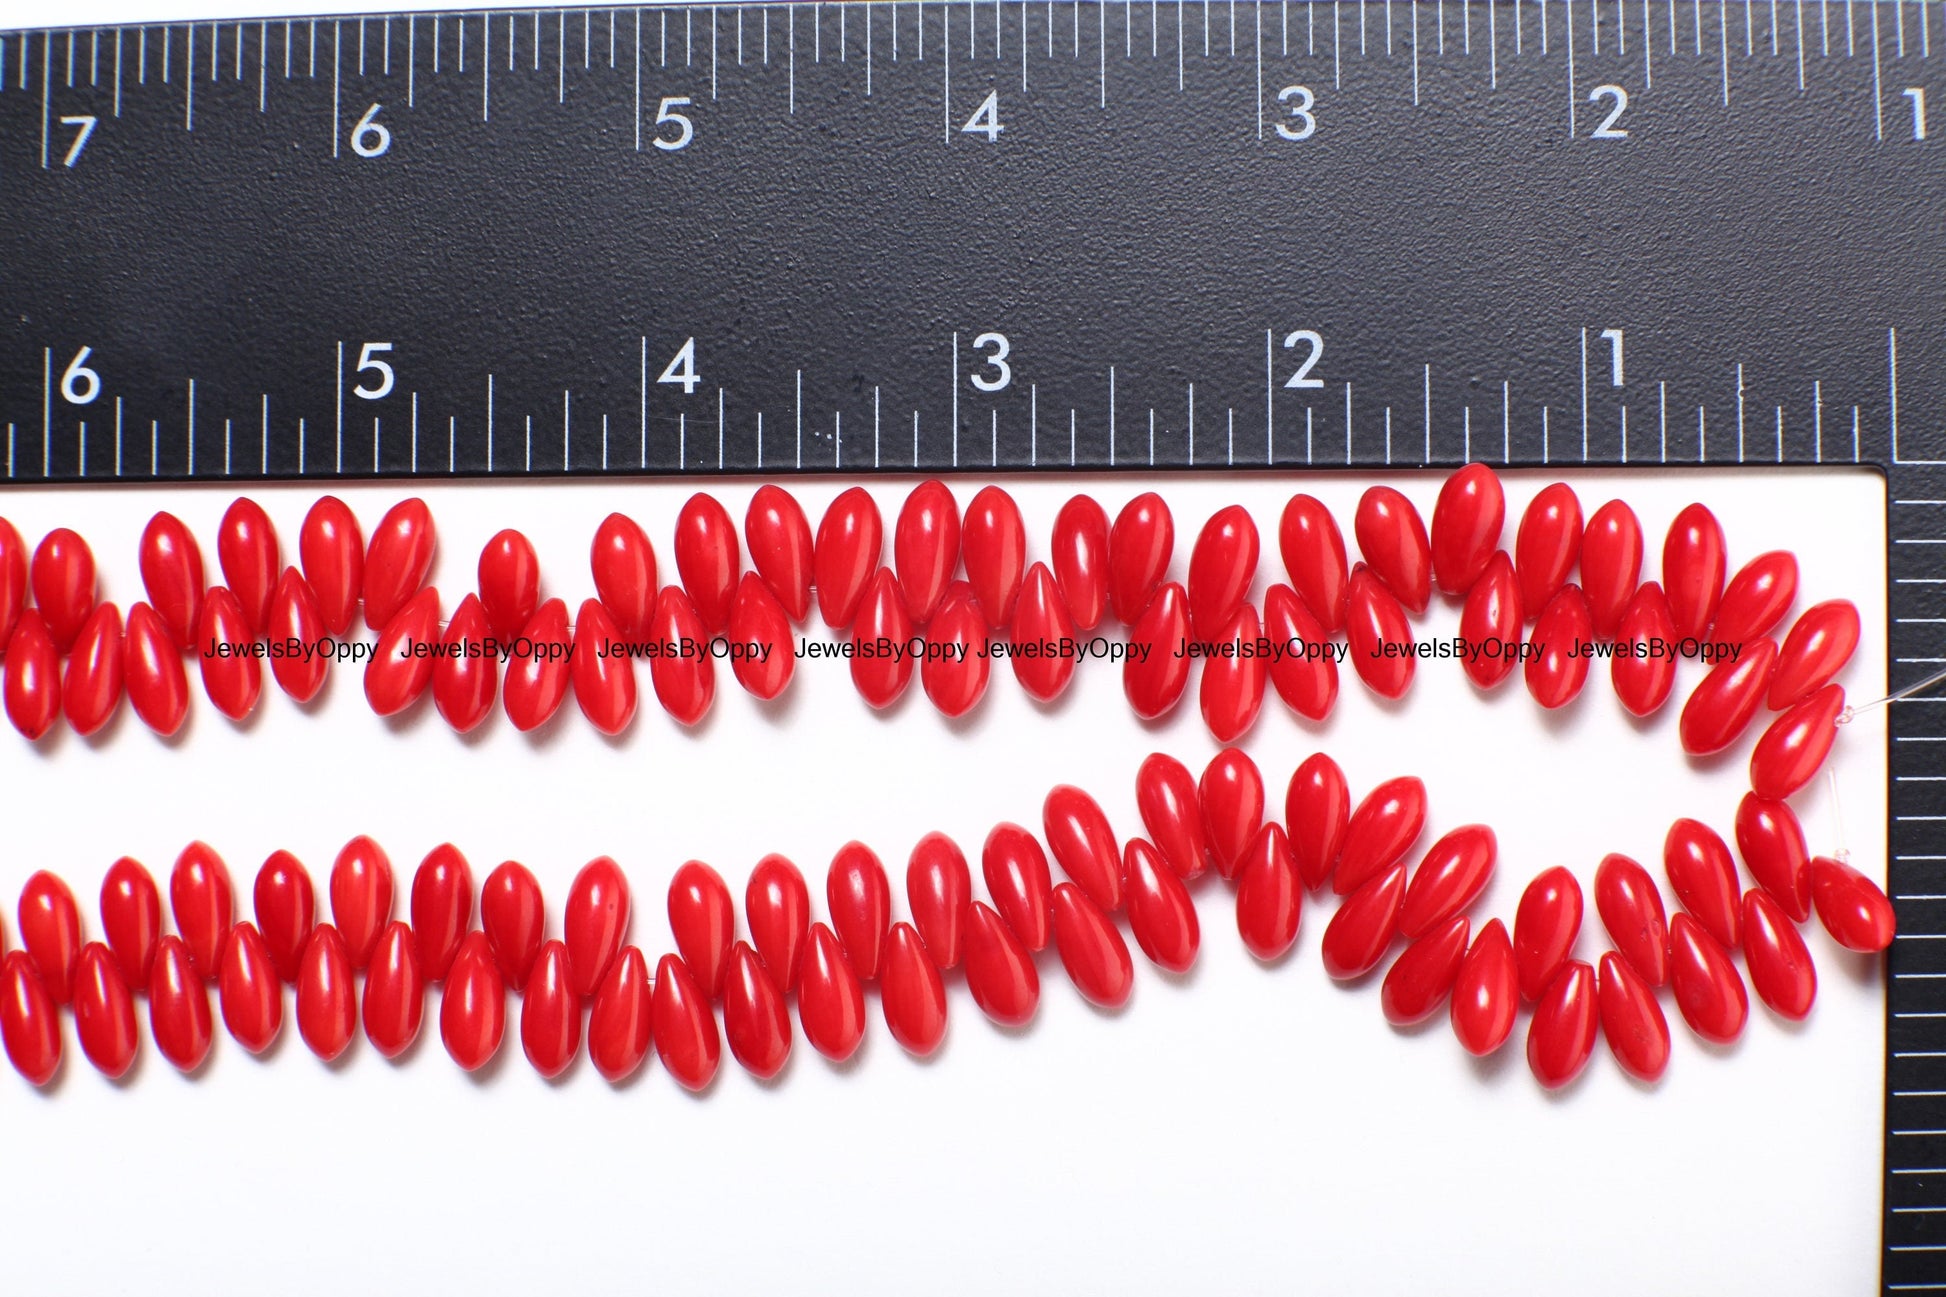 Genuine Bamboo Coral 3.5-4x7, 5x11mm Briolette AAA Gemstone Teardrop Beads, Sold by piece